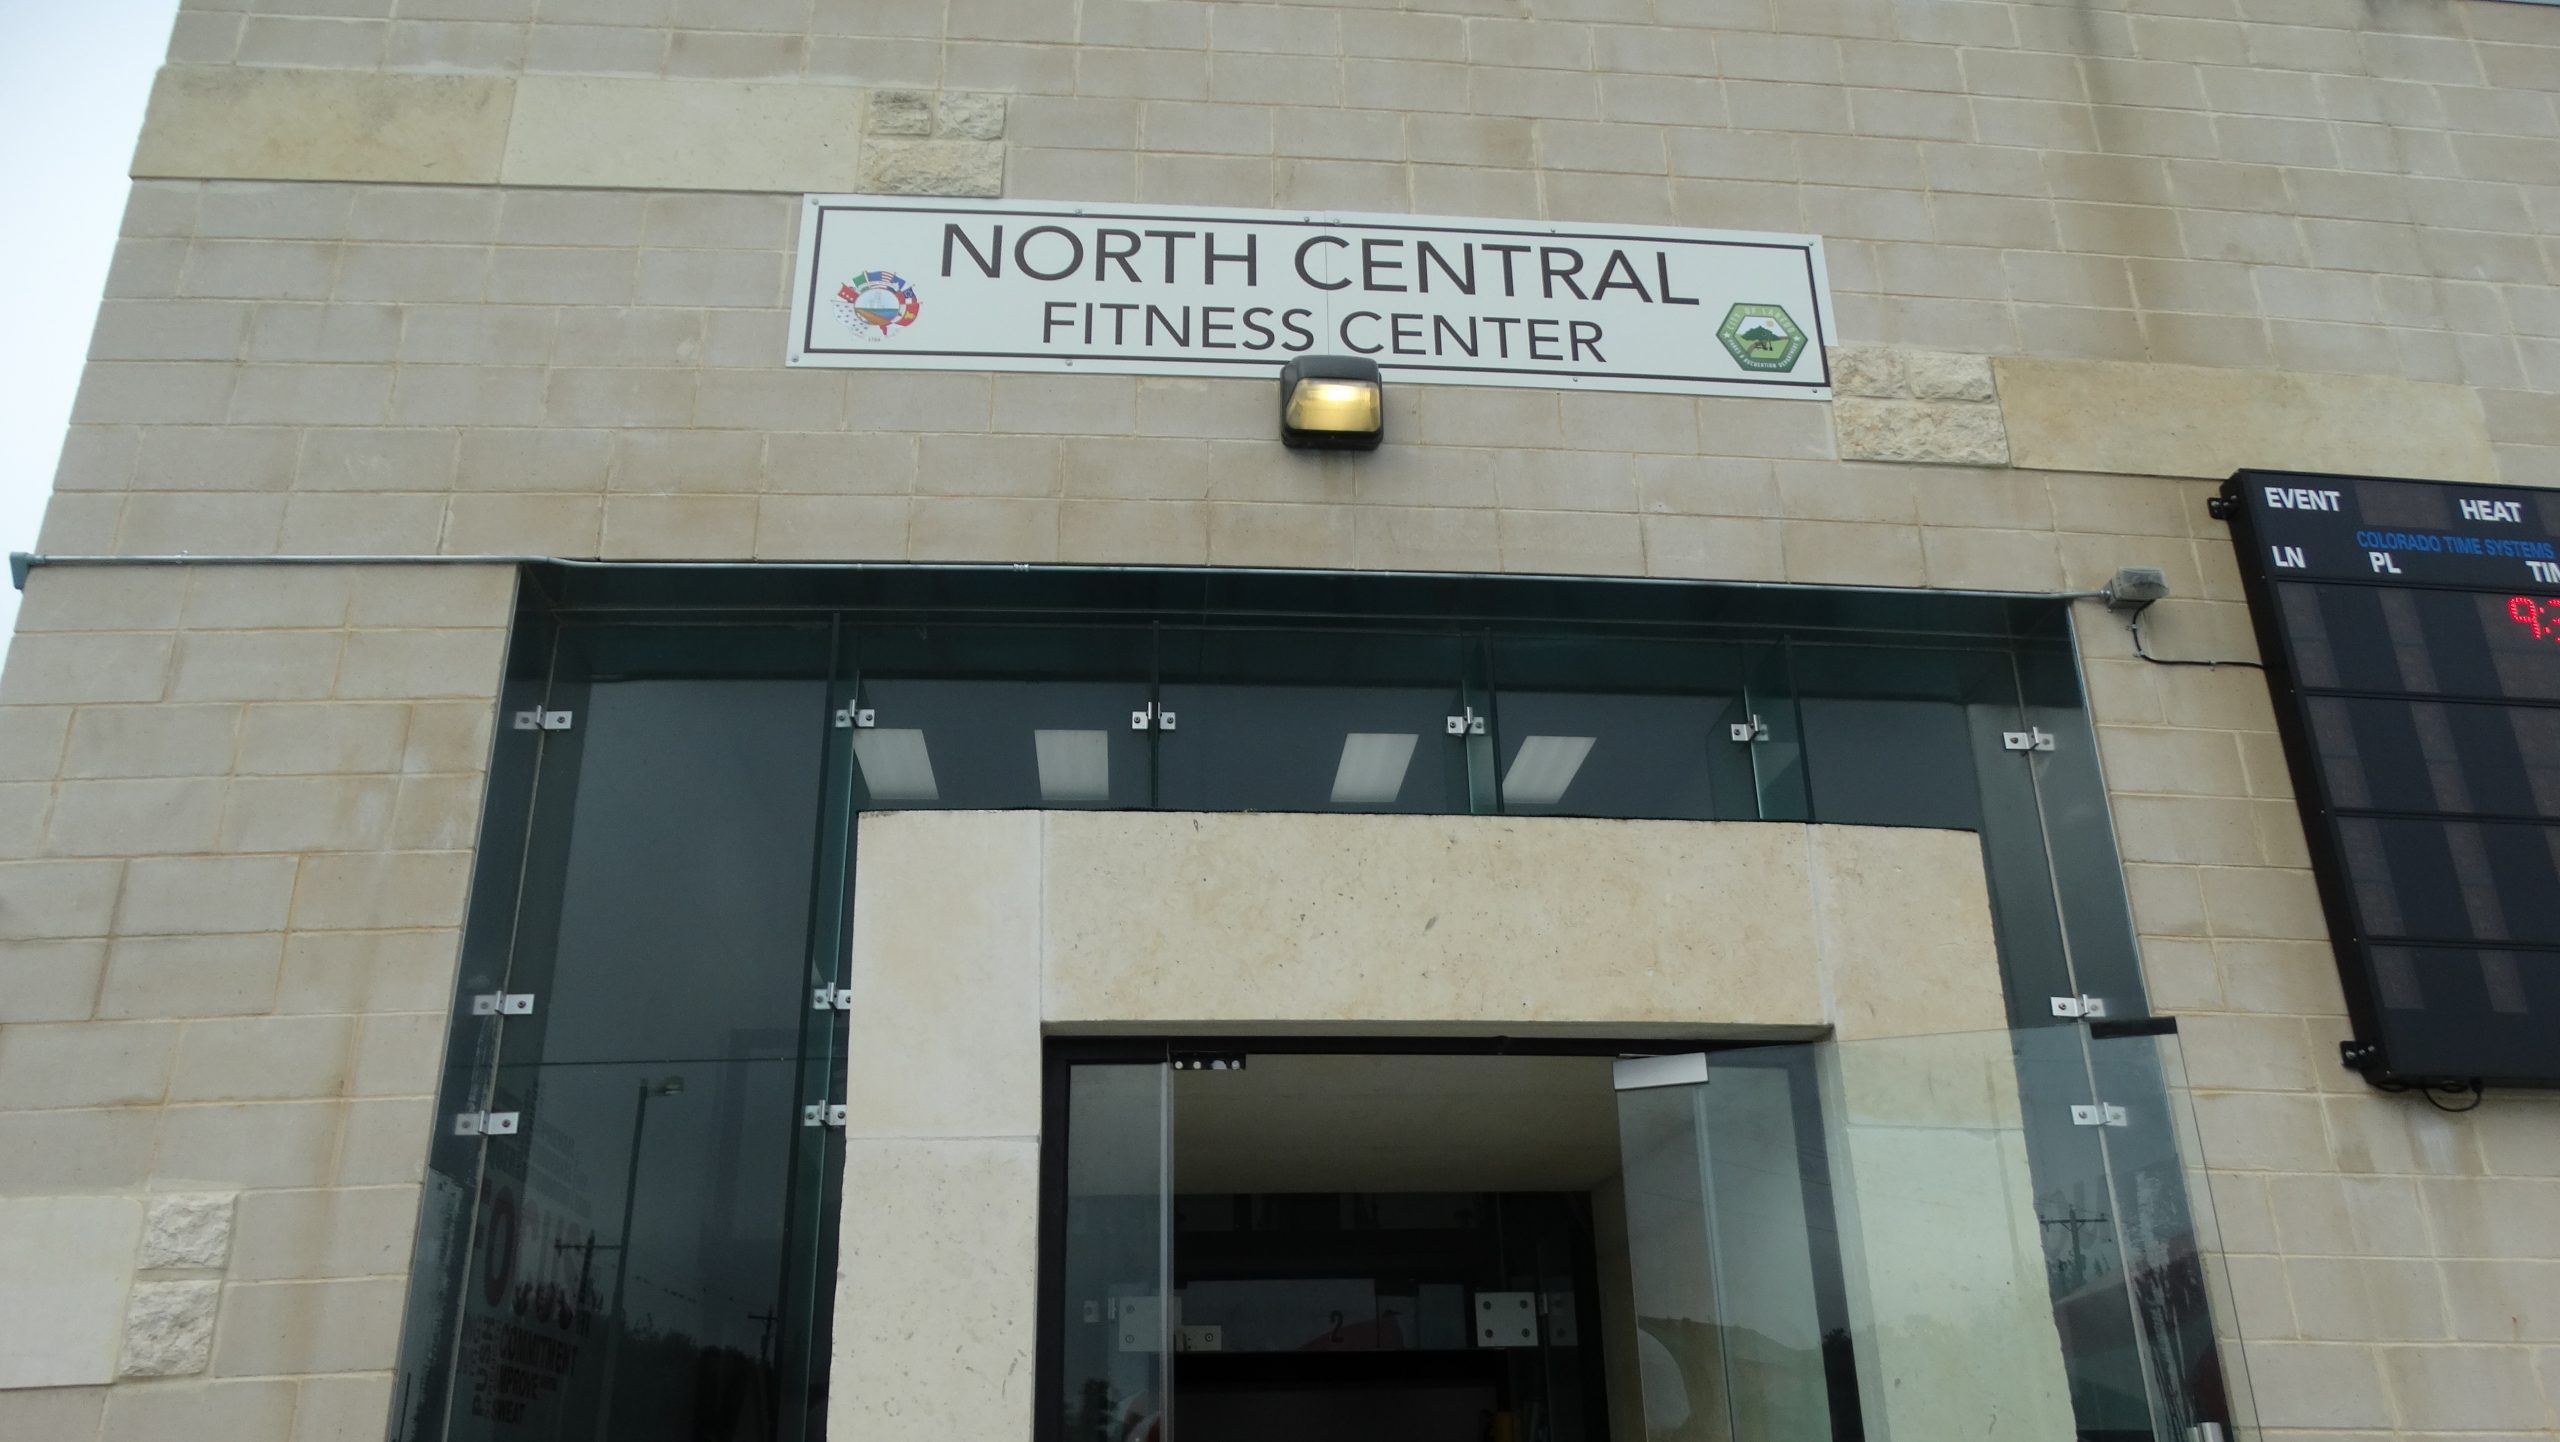 North Central Fitness Center